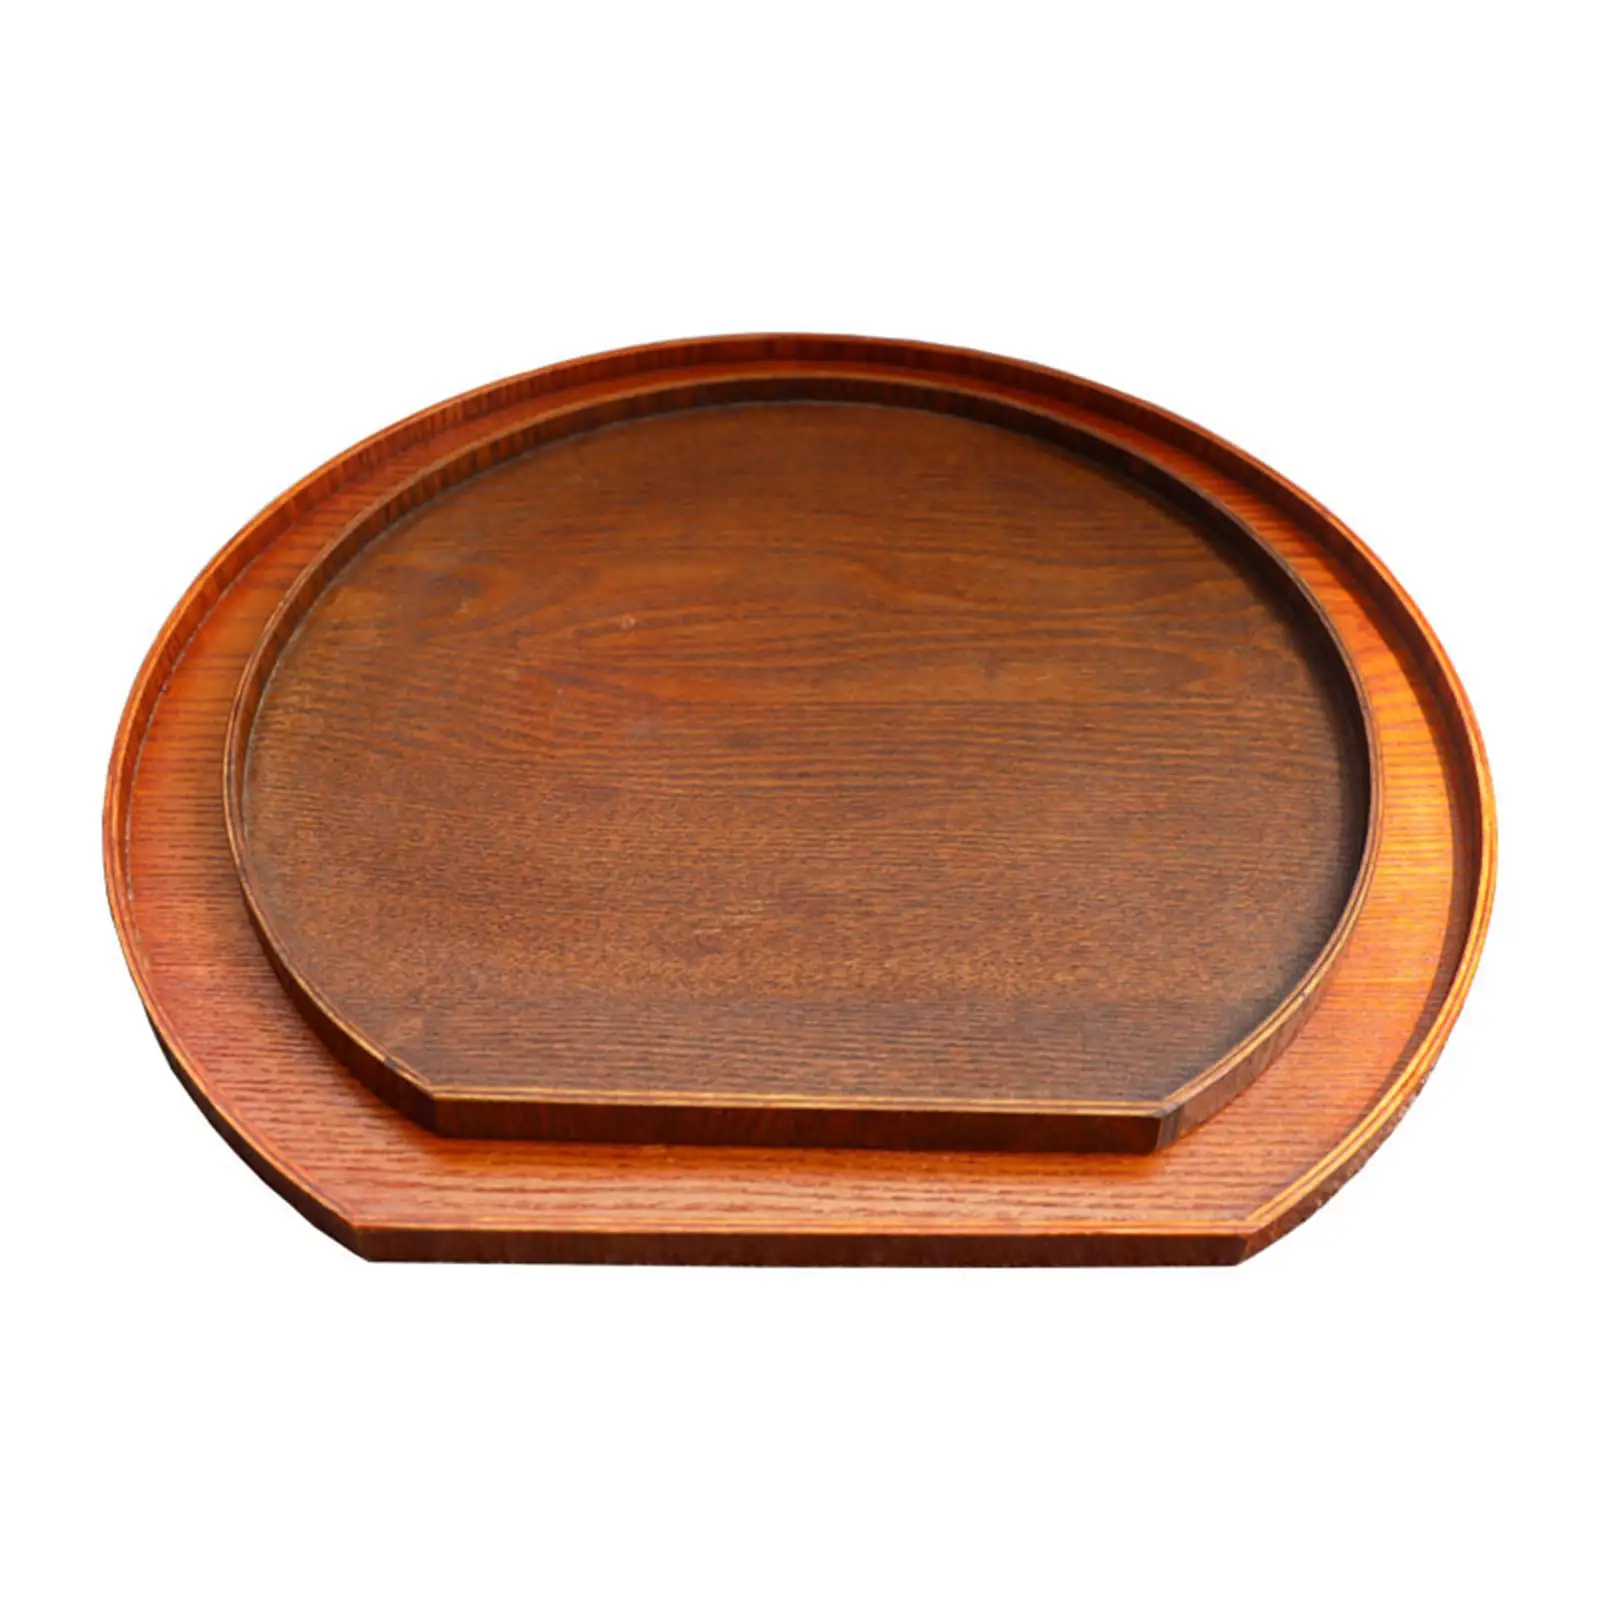 Wooden Serving Tray Round Tea Drink Platter Dessert Plates with Edge Tray